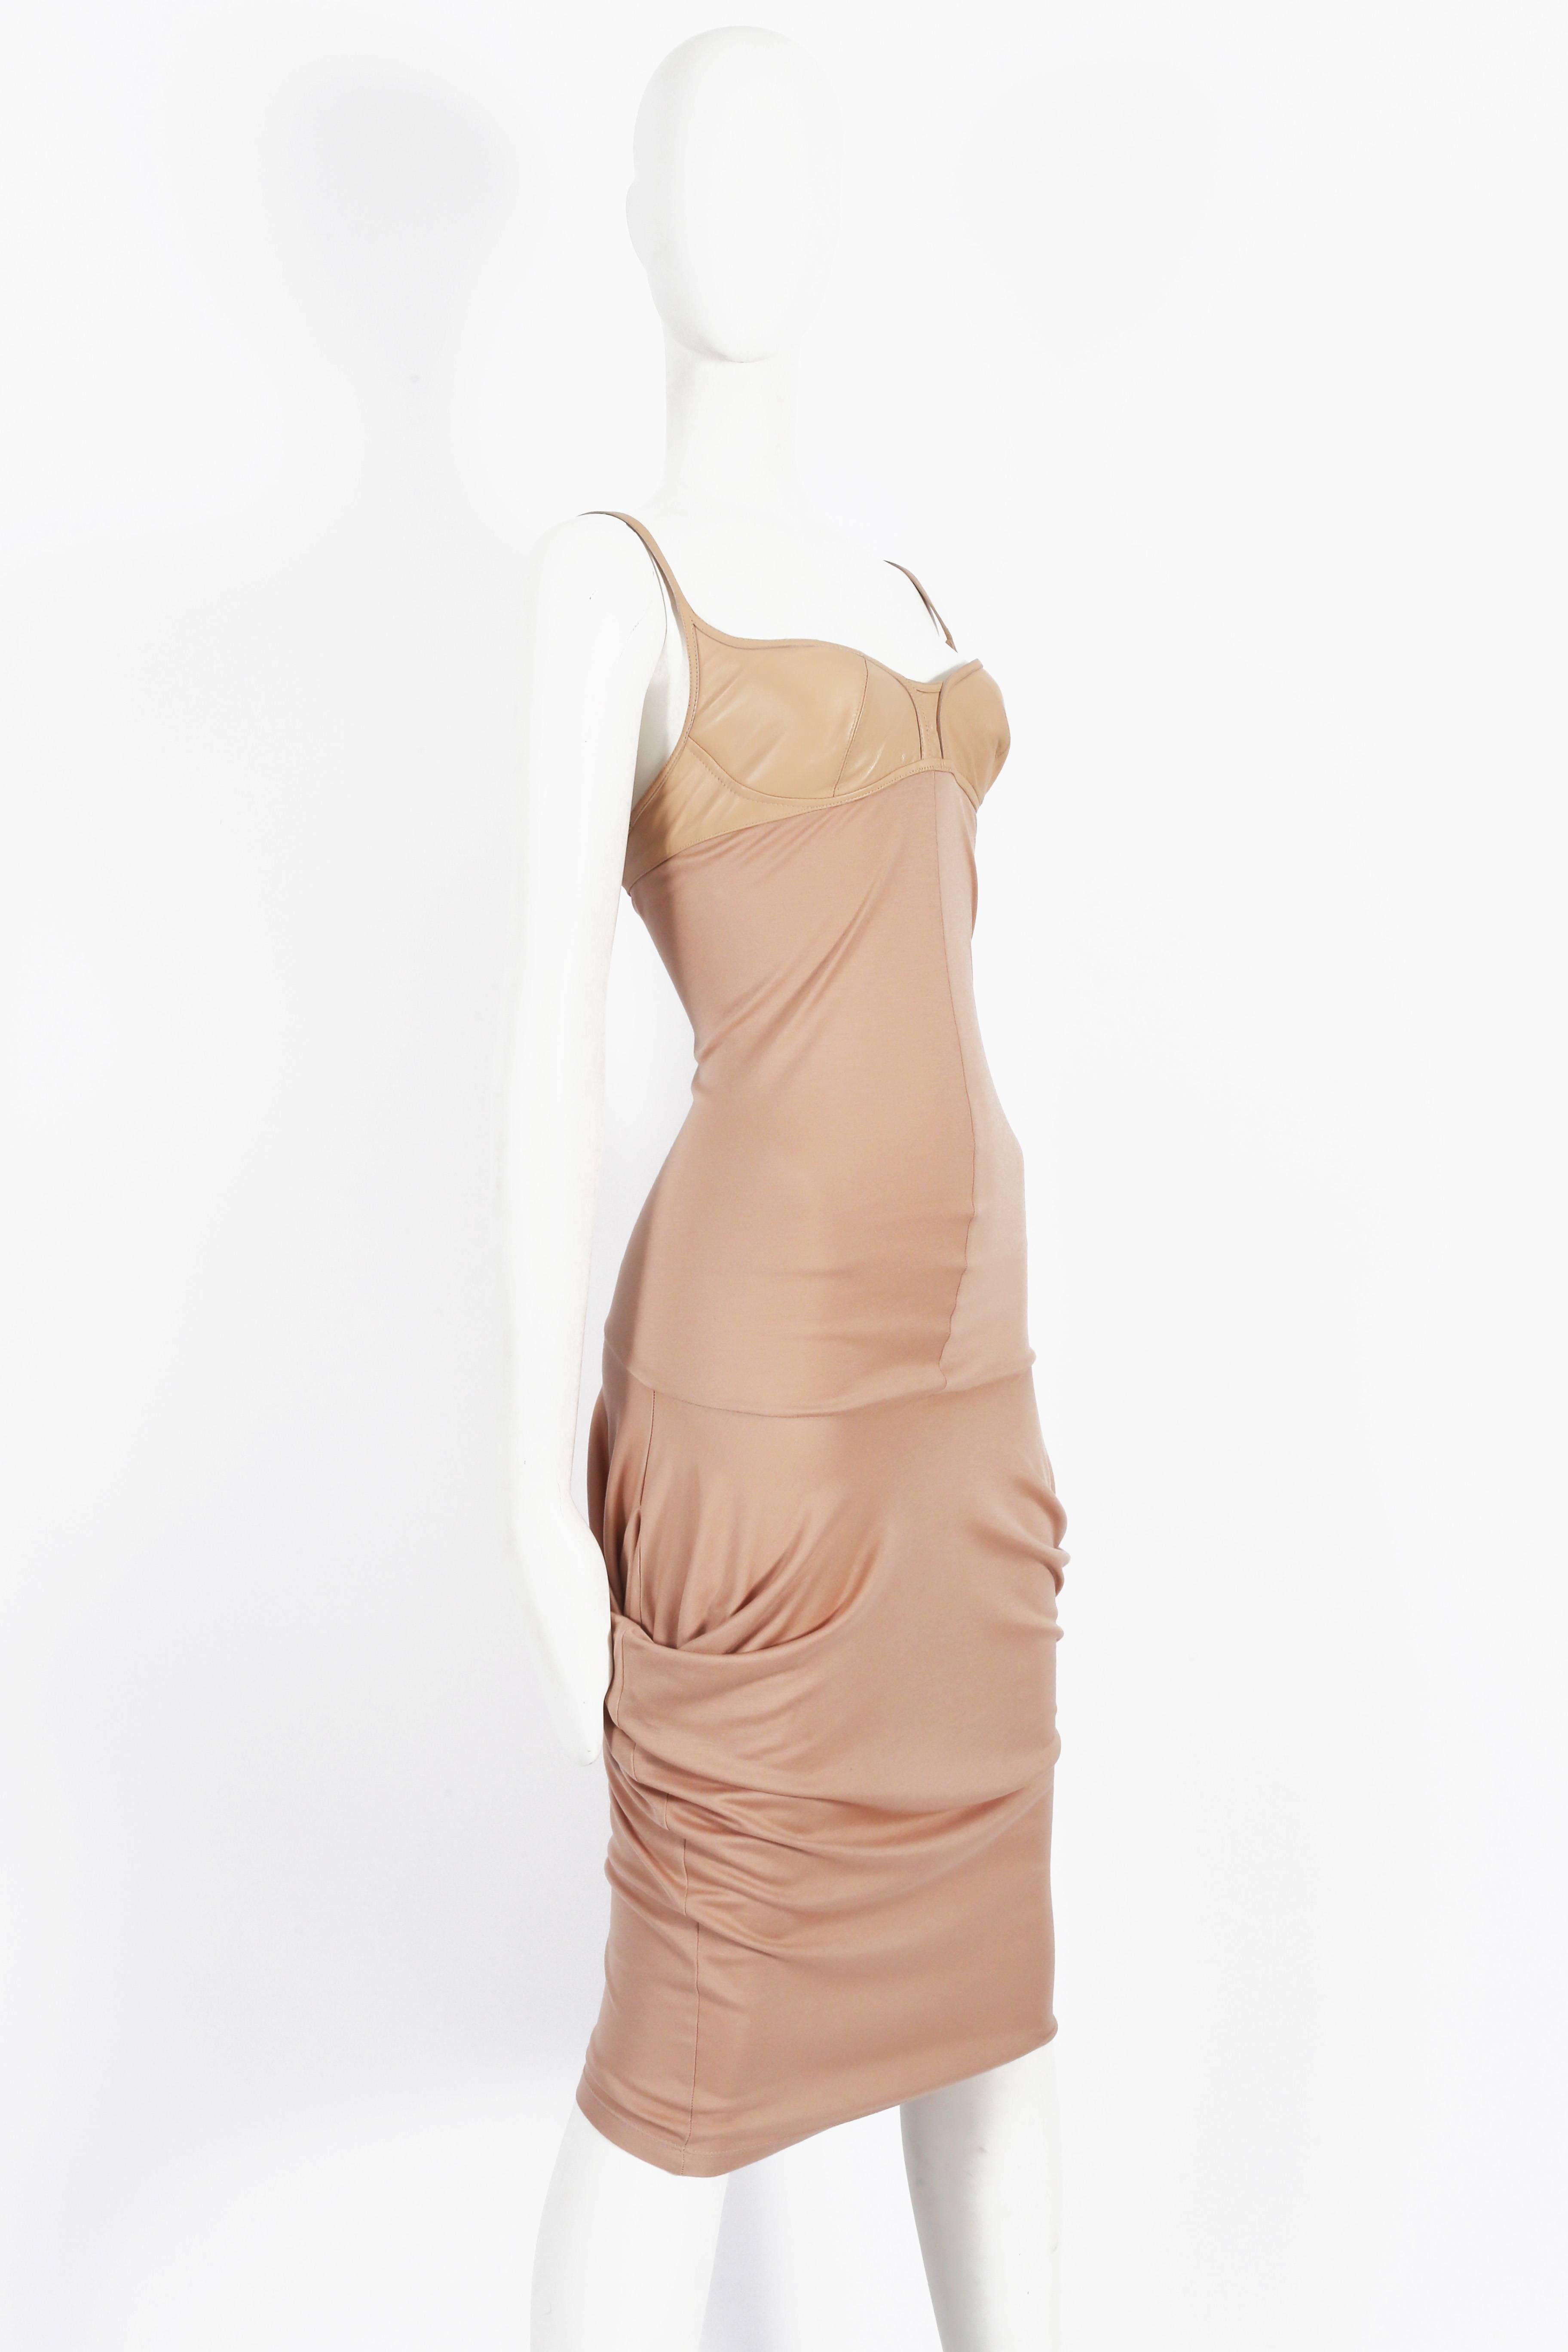 Presenting an exquisite Alexander McQueen peach silk jersey evening dress from the spring-summer 2004 collection. This captivating dress exudes opulence and sophistication, showcasing the iconic designer's visionary style.

The dress features an